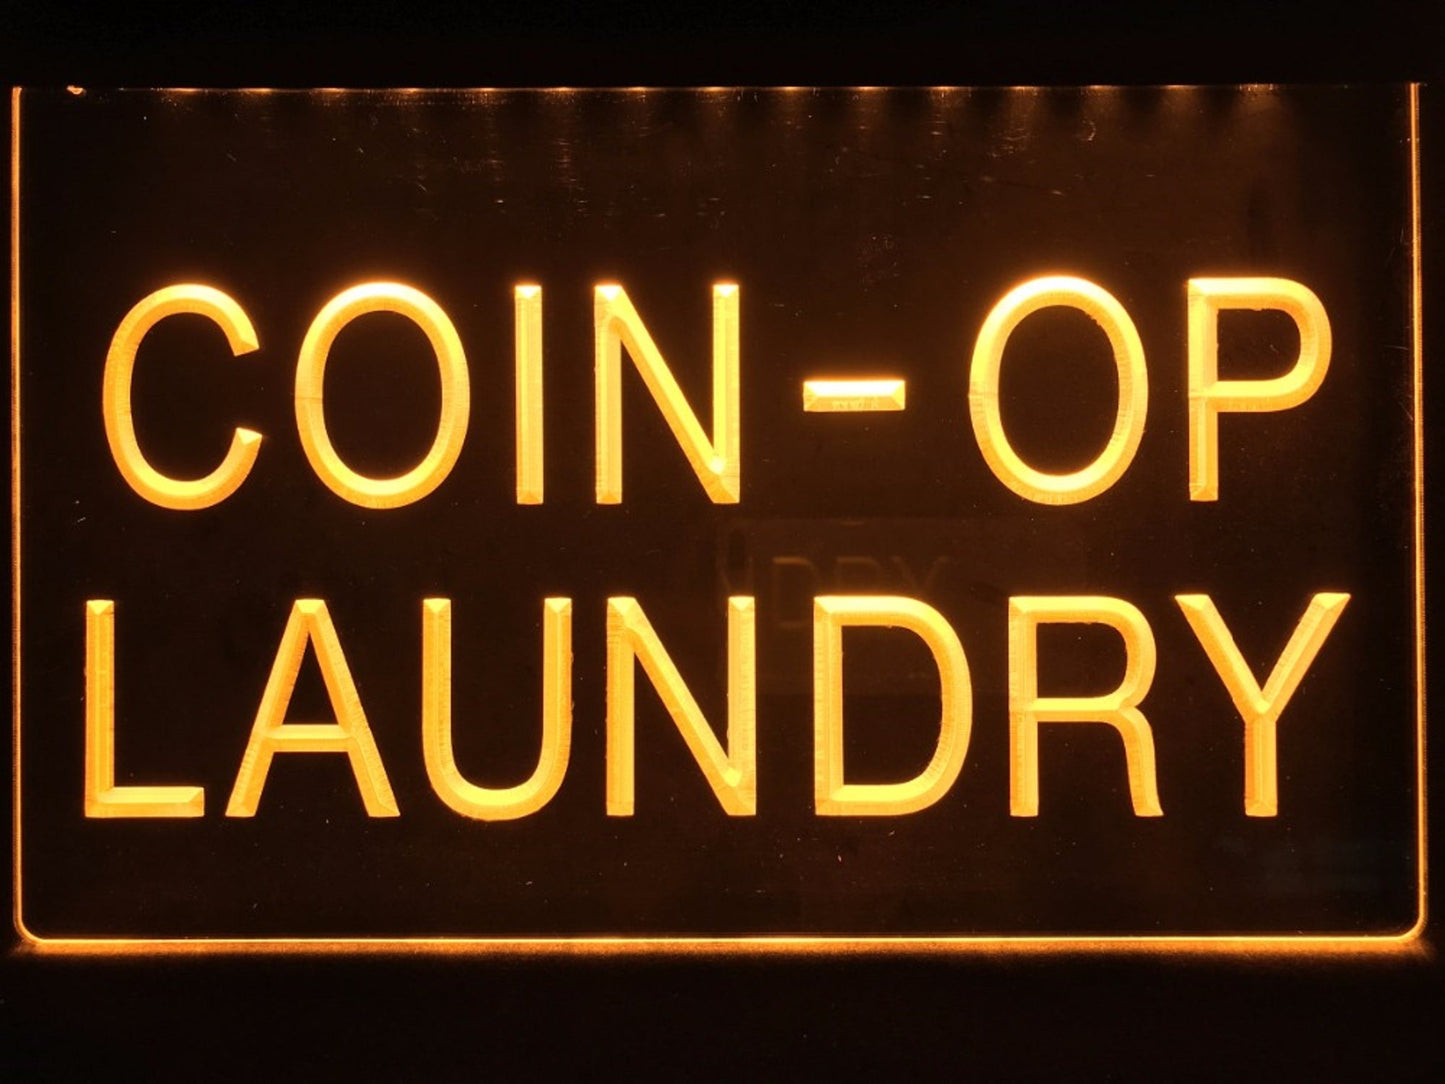 Neon Sign Coin-op Laundry Wall Desktop Decor Free Shipping